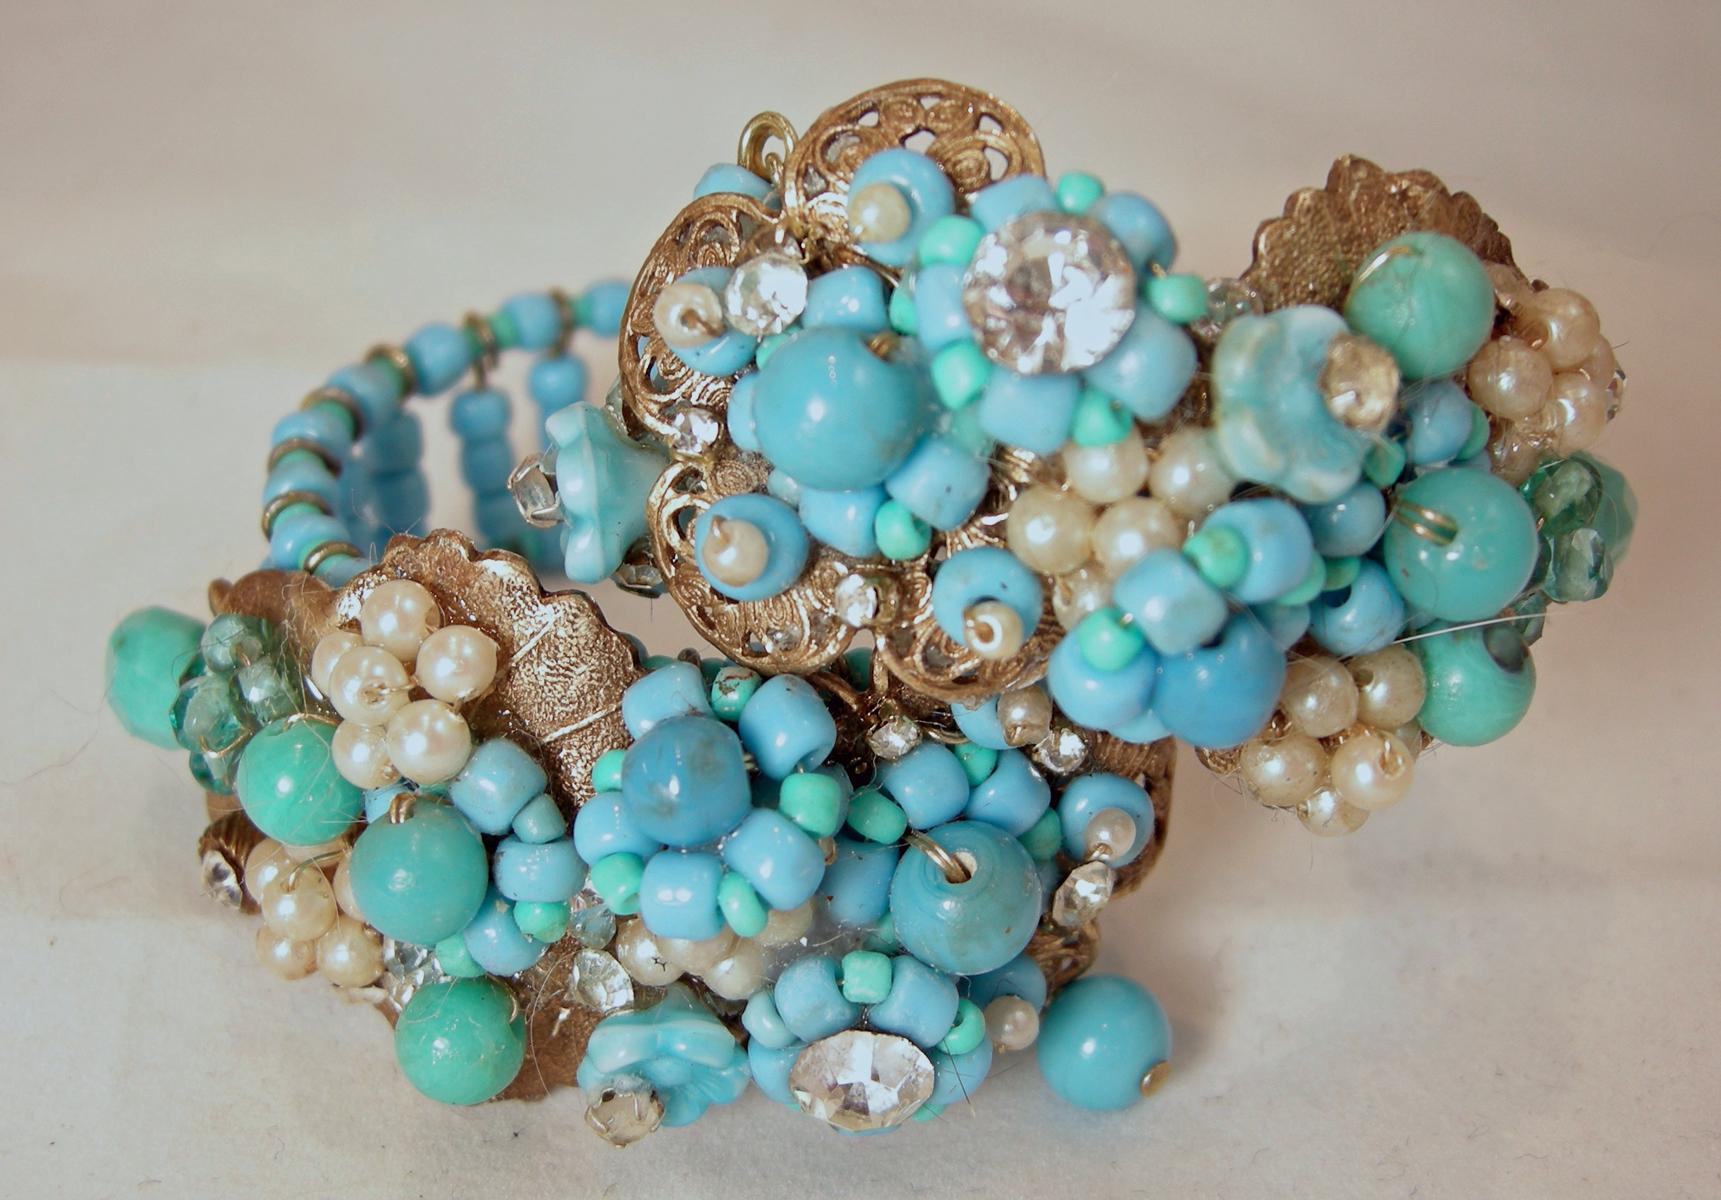 This vintage unsigned Haskell wrap bracelet has a floral design on both sides with faux turquoise flowers mixed with faux pearl flowers and crystal accents … set on a gold tone filigree base. In excellent condition, this wrap bracelet measures